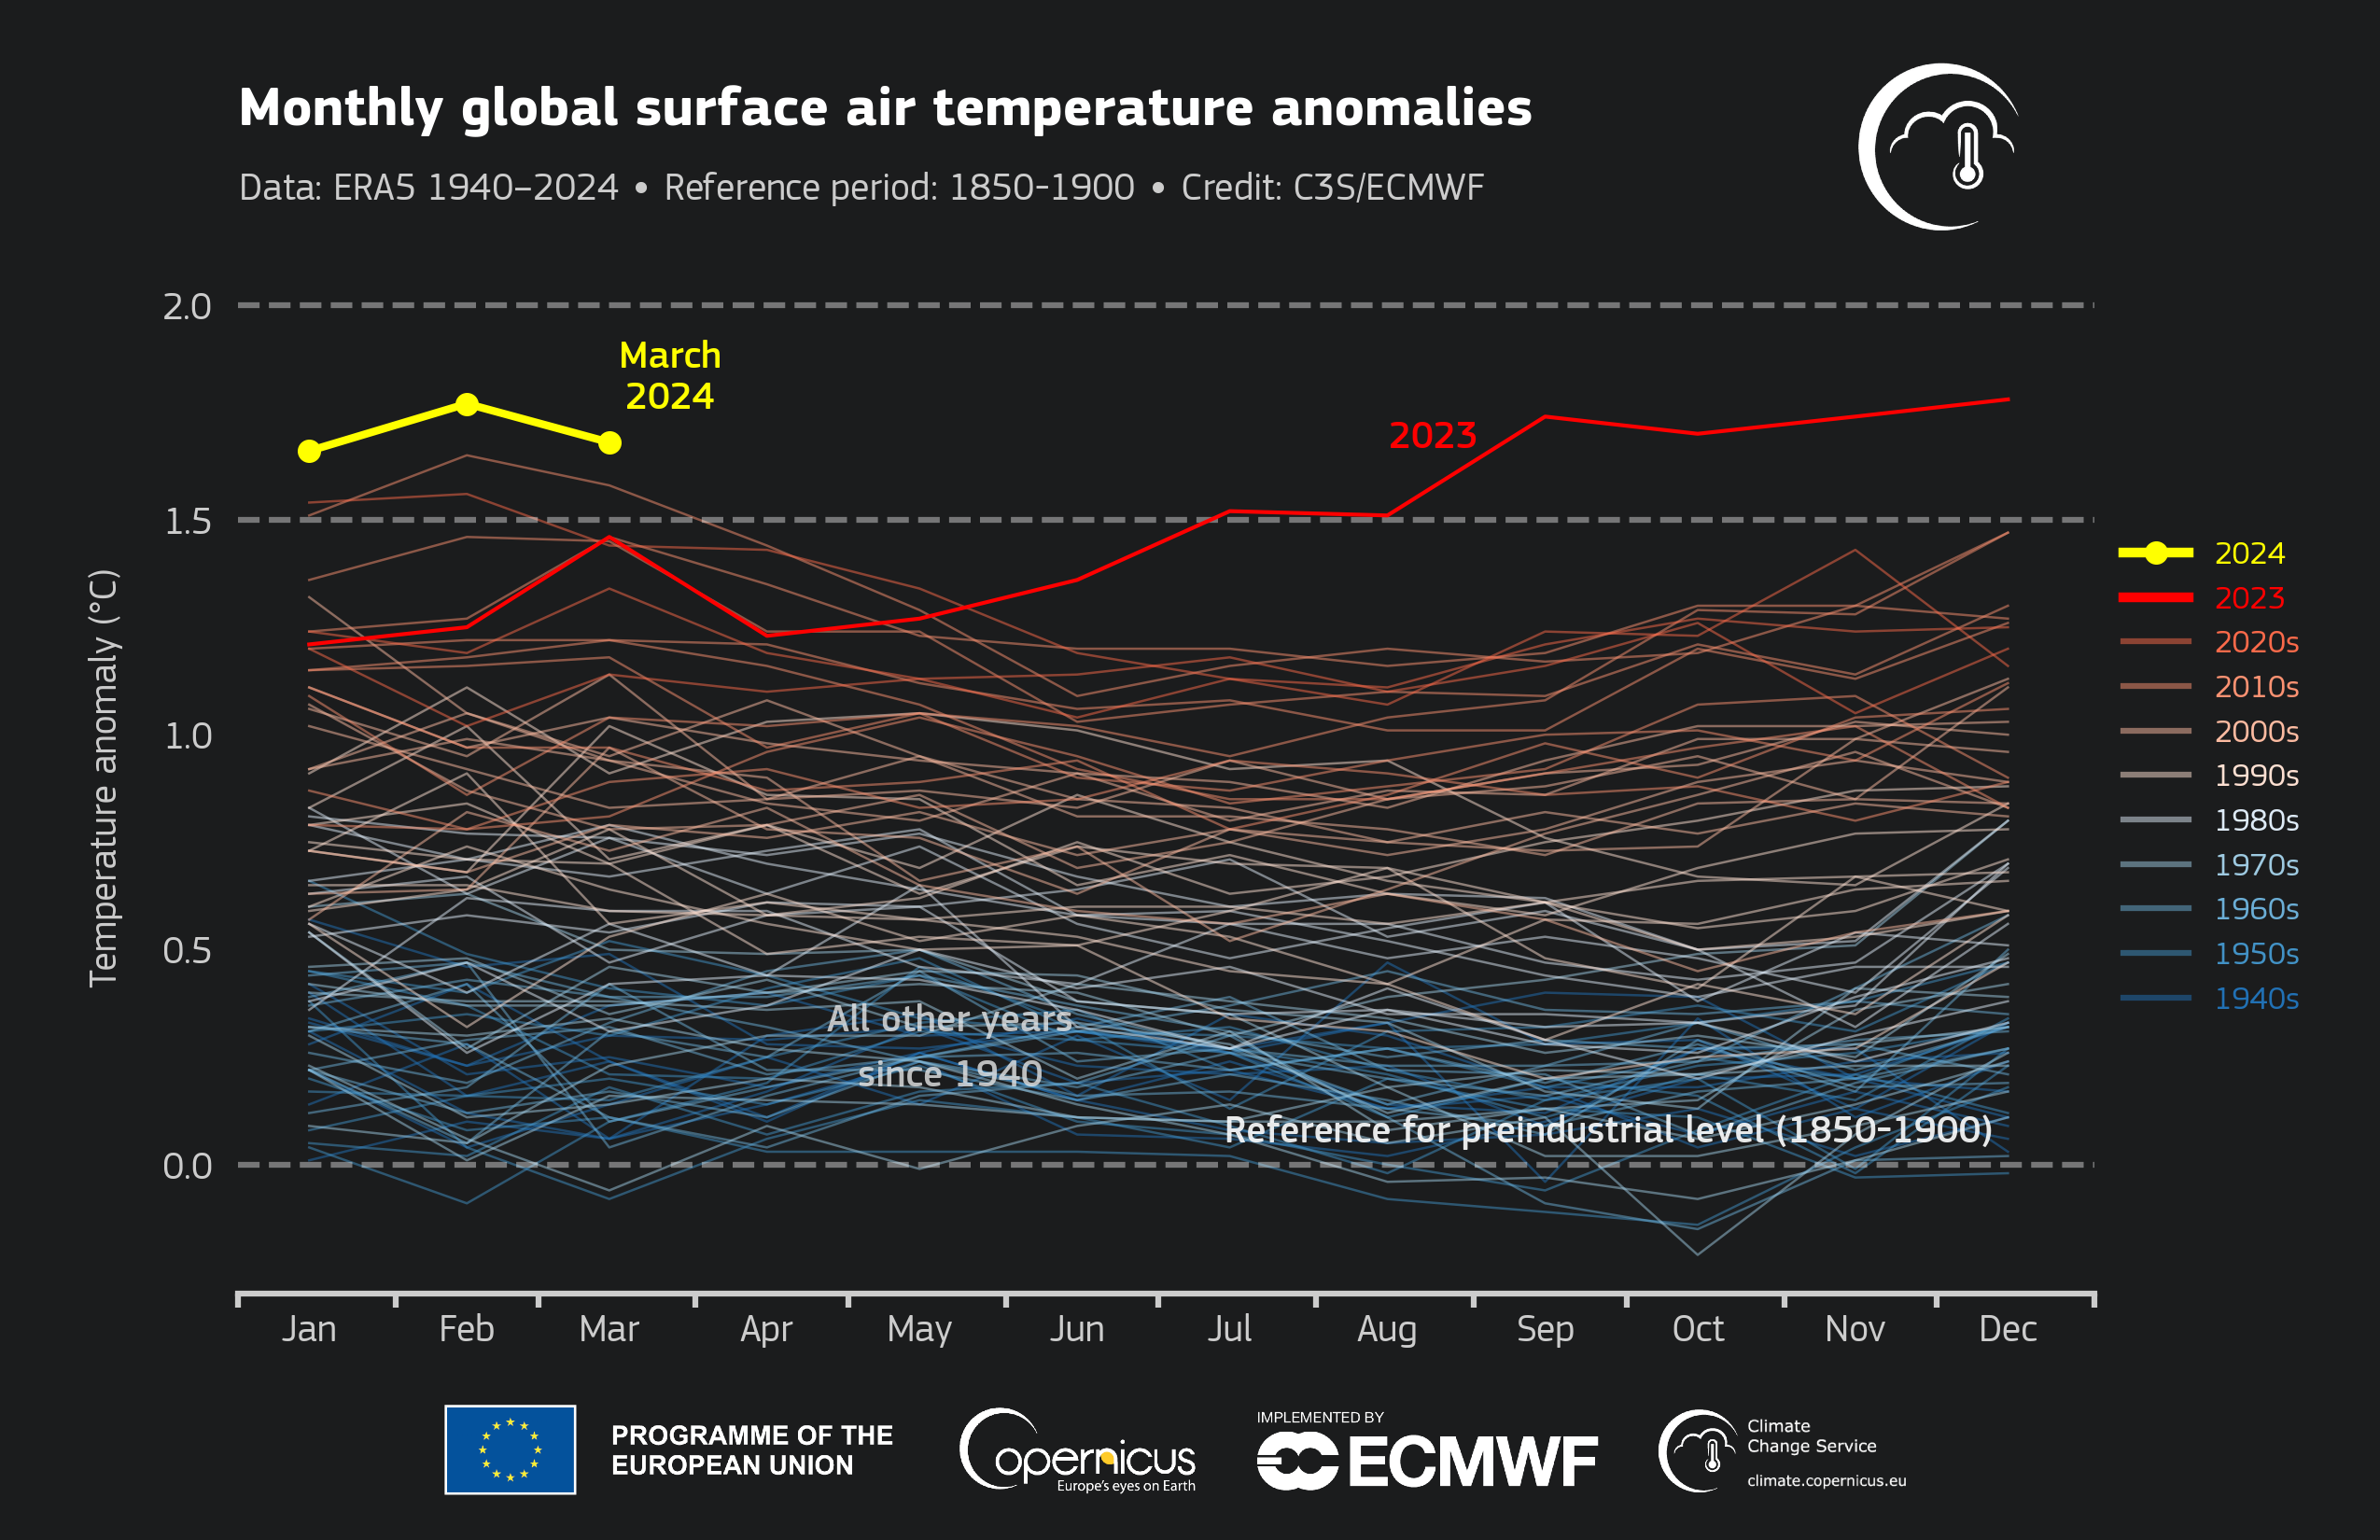 Monthly global surface air temperature anomalies (°C) relative to 1850–1900 from January 1940 to March 2024, plotted as time series for each year. 2024 is shown with a thick yellow line, 2023 with a thick red line, and all other years with thin lines shaded according to the decade, from blue (1940s) to brick red (2020s). Data source: ERA5. Graphic: C3S / ECMWF